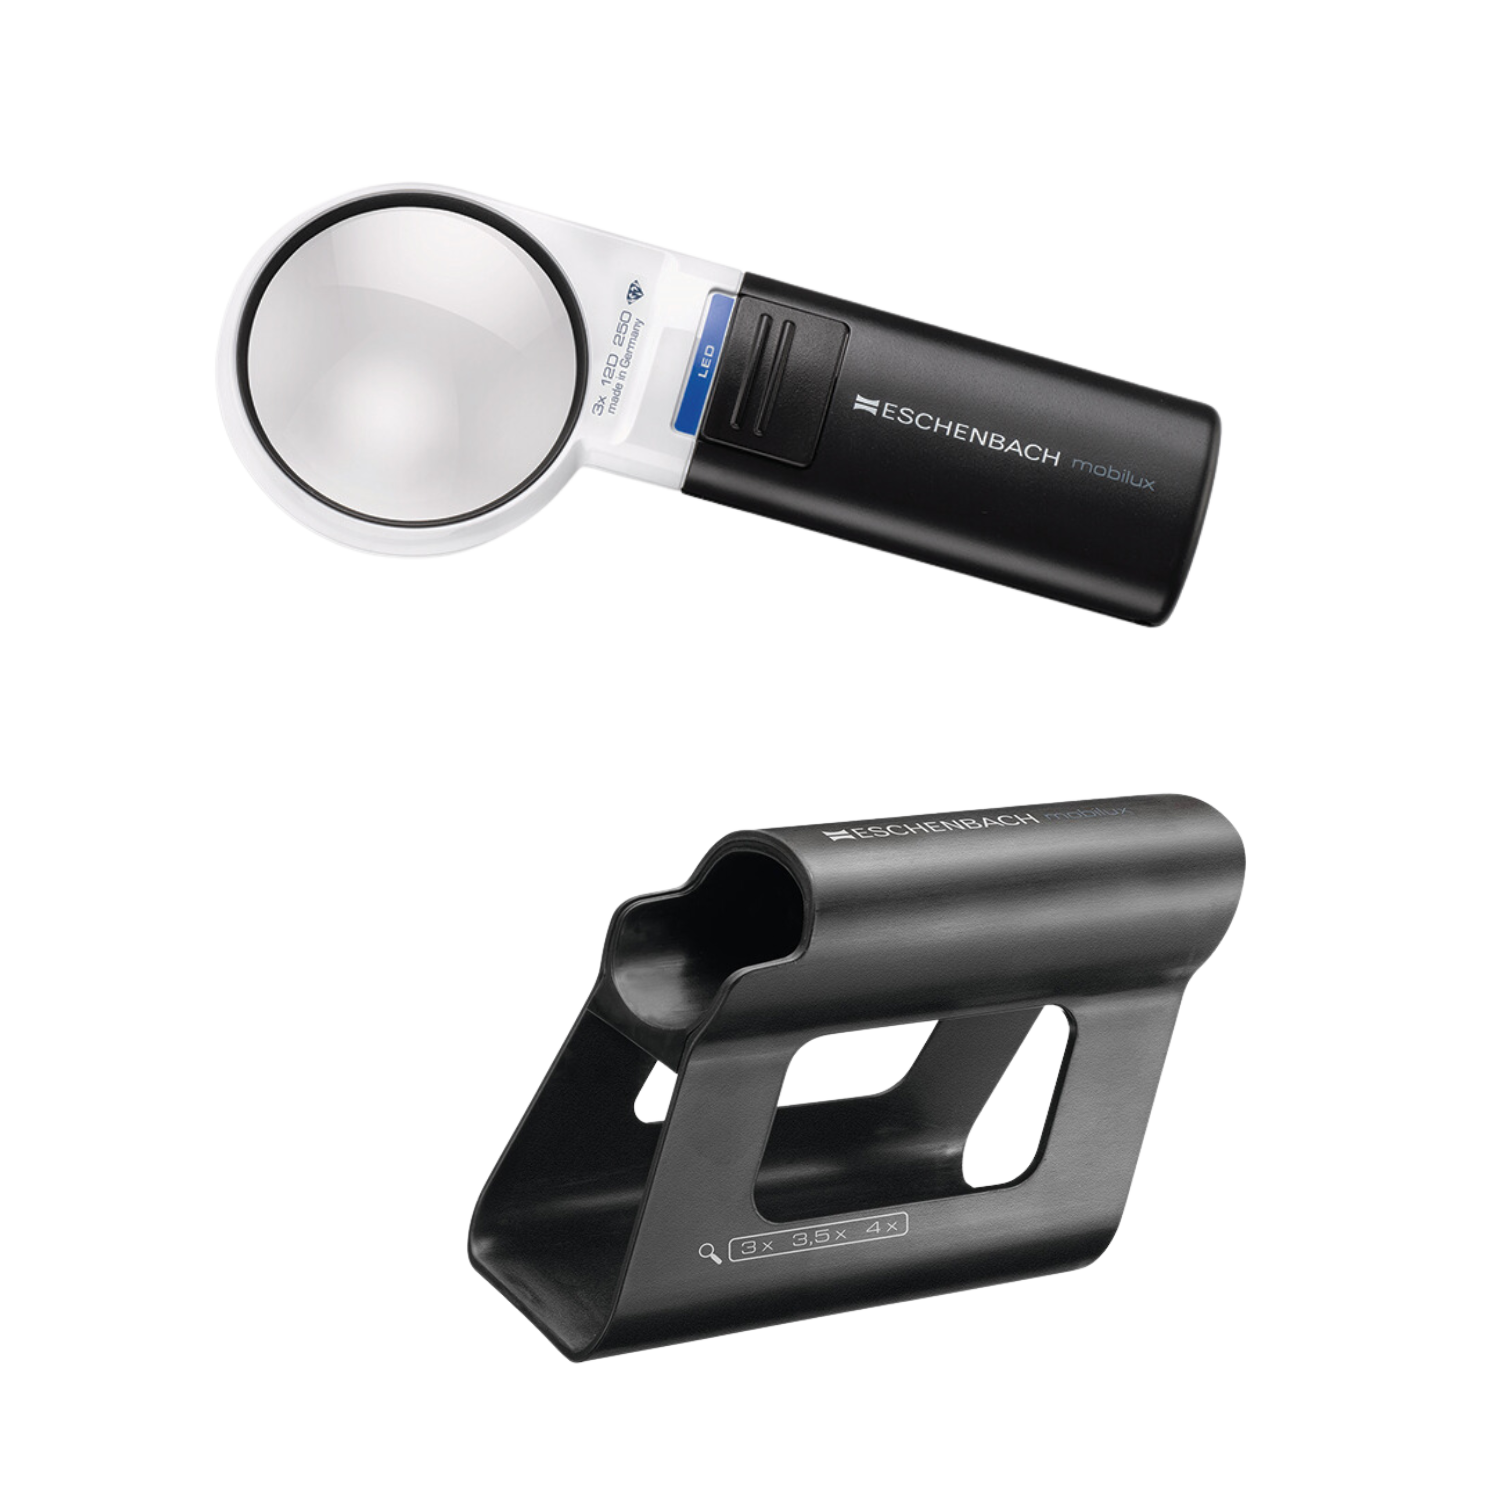 Image of the Round 3x Mobilux handheld magnifier with Mobase stand from Eschenbach.